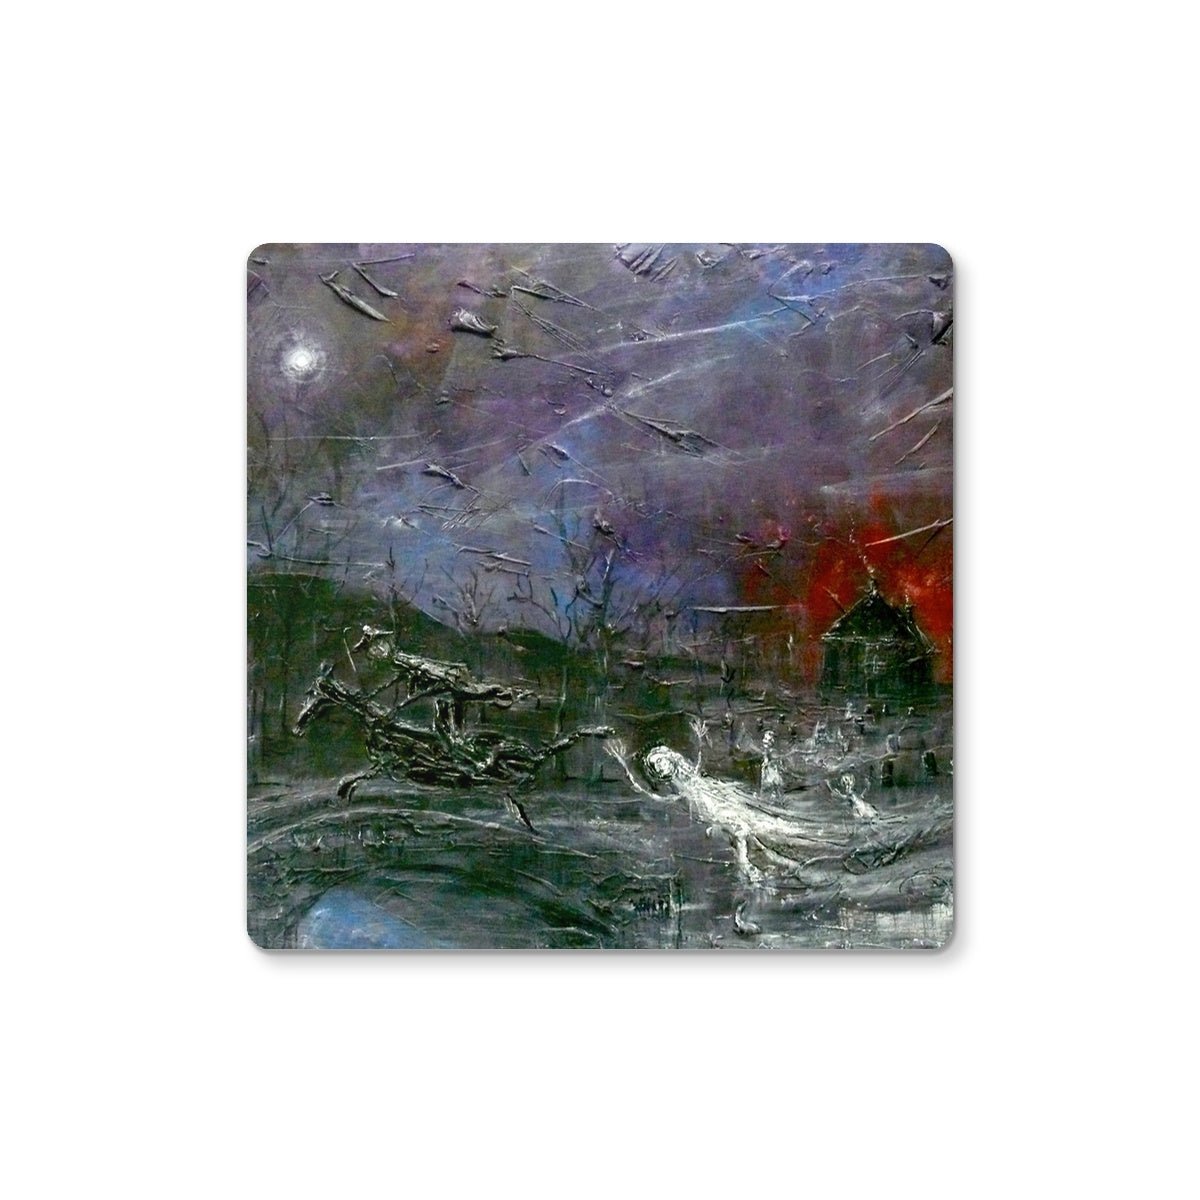 Tam O Shanter Art Gifts Coaster-Coasters-Abstract & Impressionistic Art Gallery-6 Coasters-Paintings, Prints, Homeware, Art Gifts From Scotland By Scottish Artist Kevin Hunter